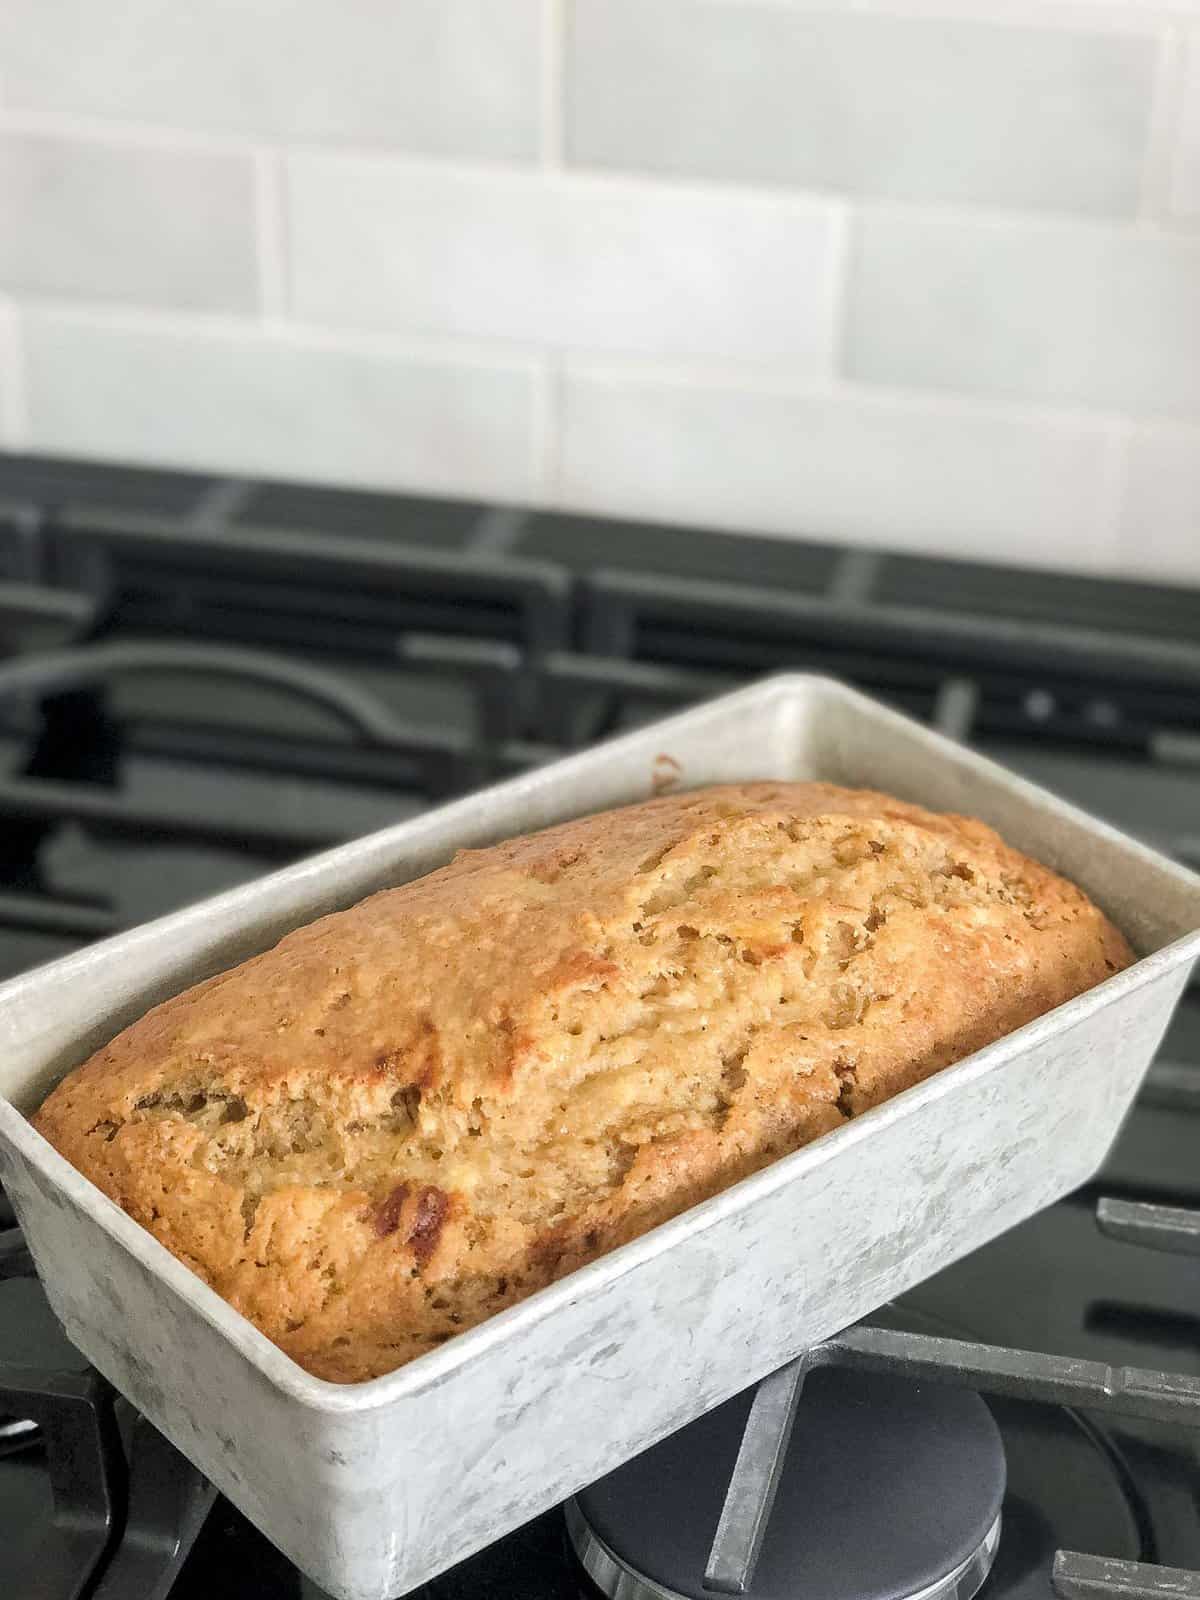 Loaf of banana bread with applesauce.